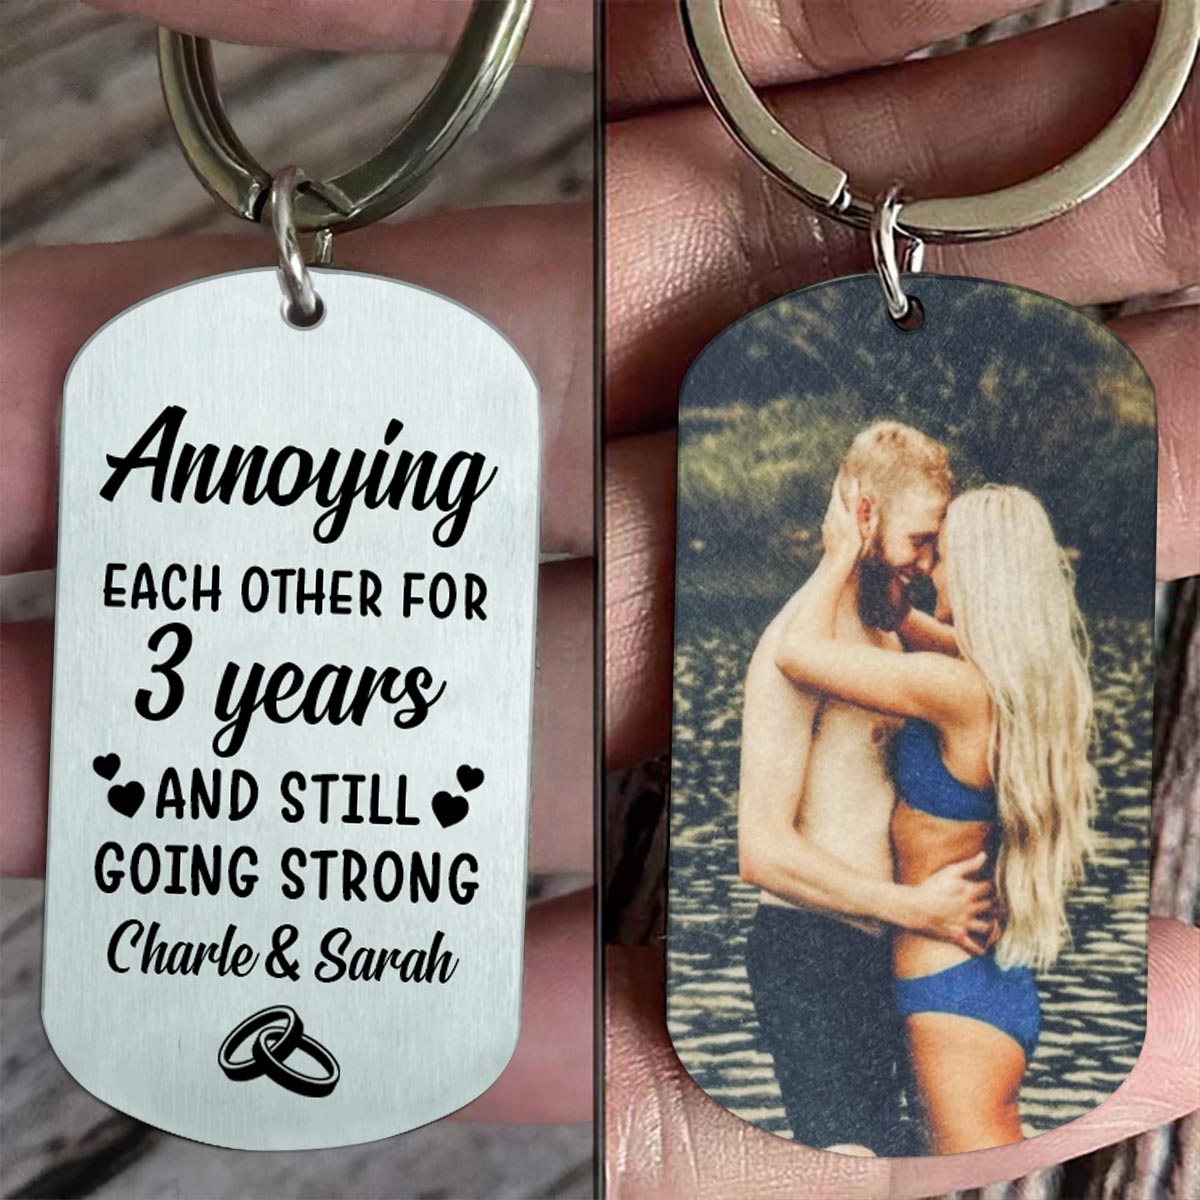 I'm Yours - Couple gift for husband, boyfriend, wife, girlfriend - Personalized Stainless Steel Keychain